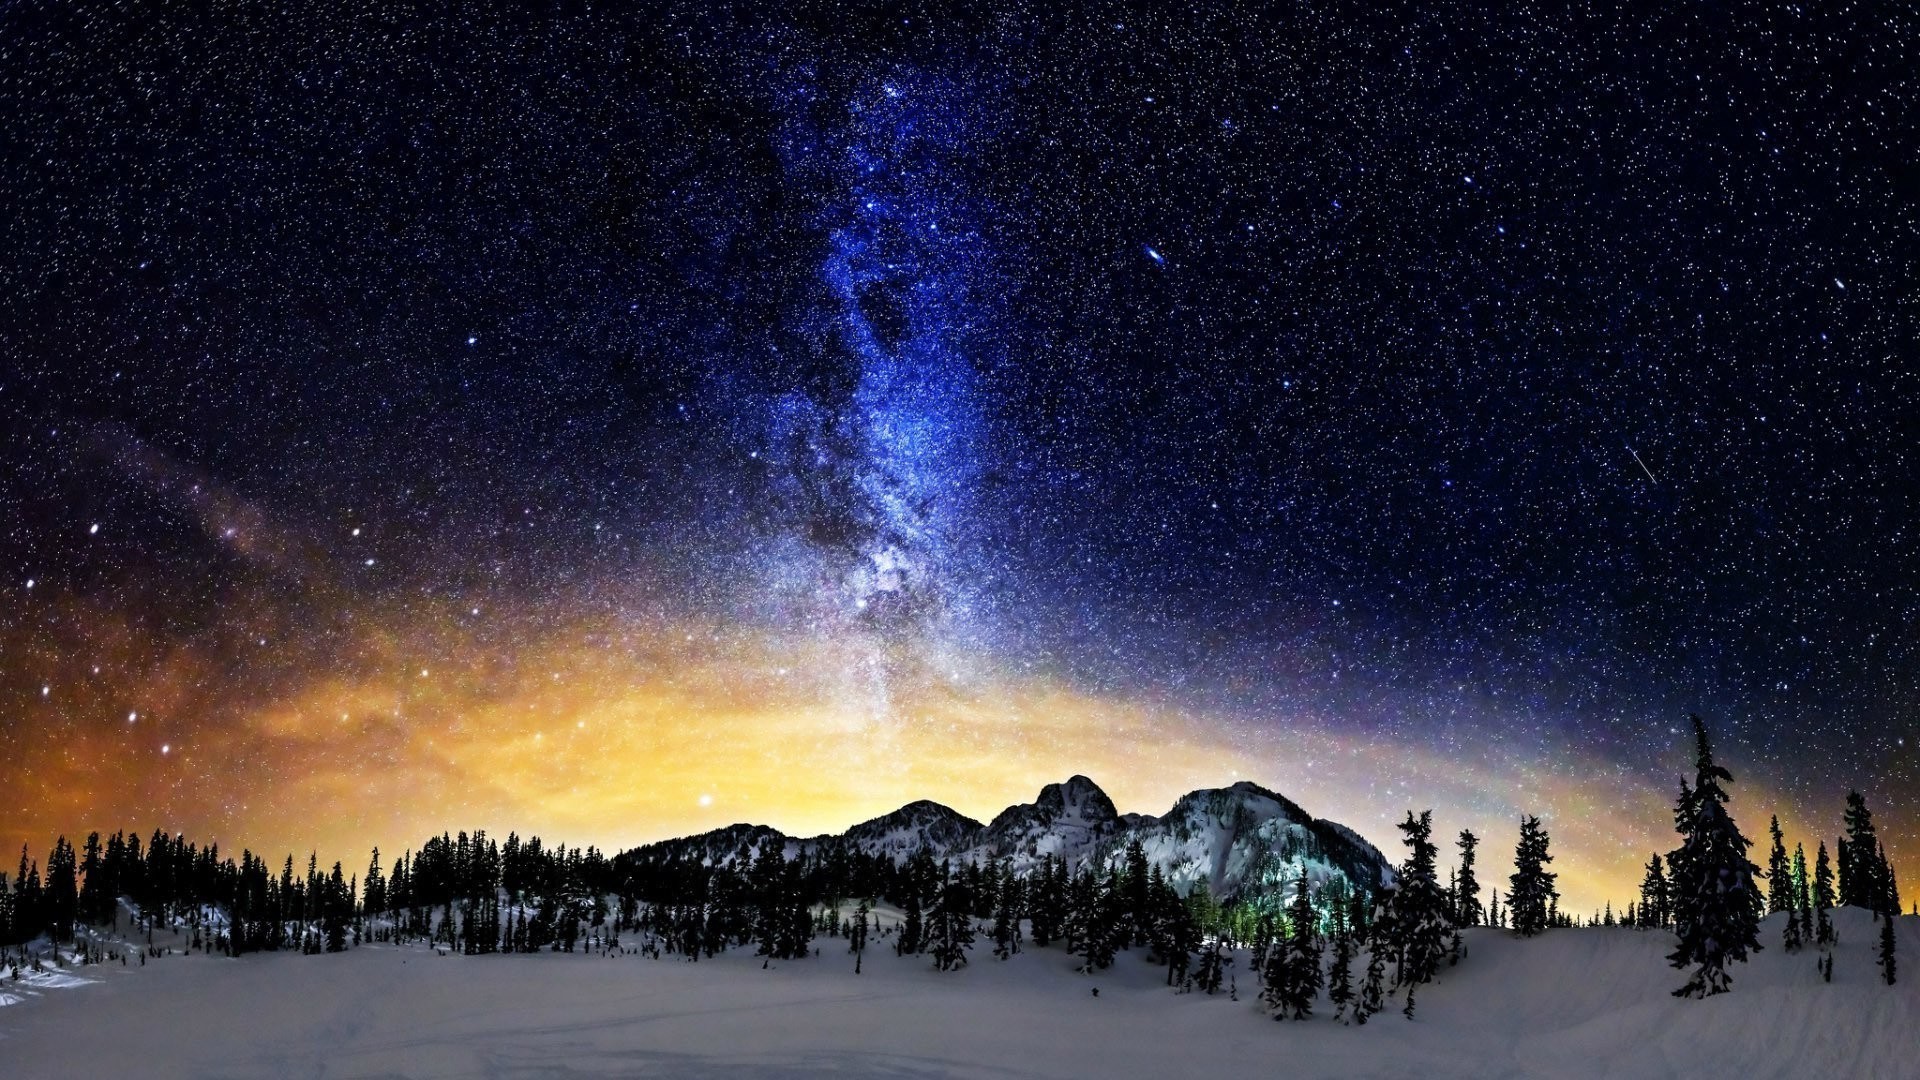 Milky Way Above The Snowy Mountains